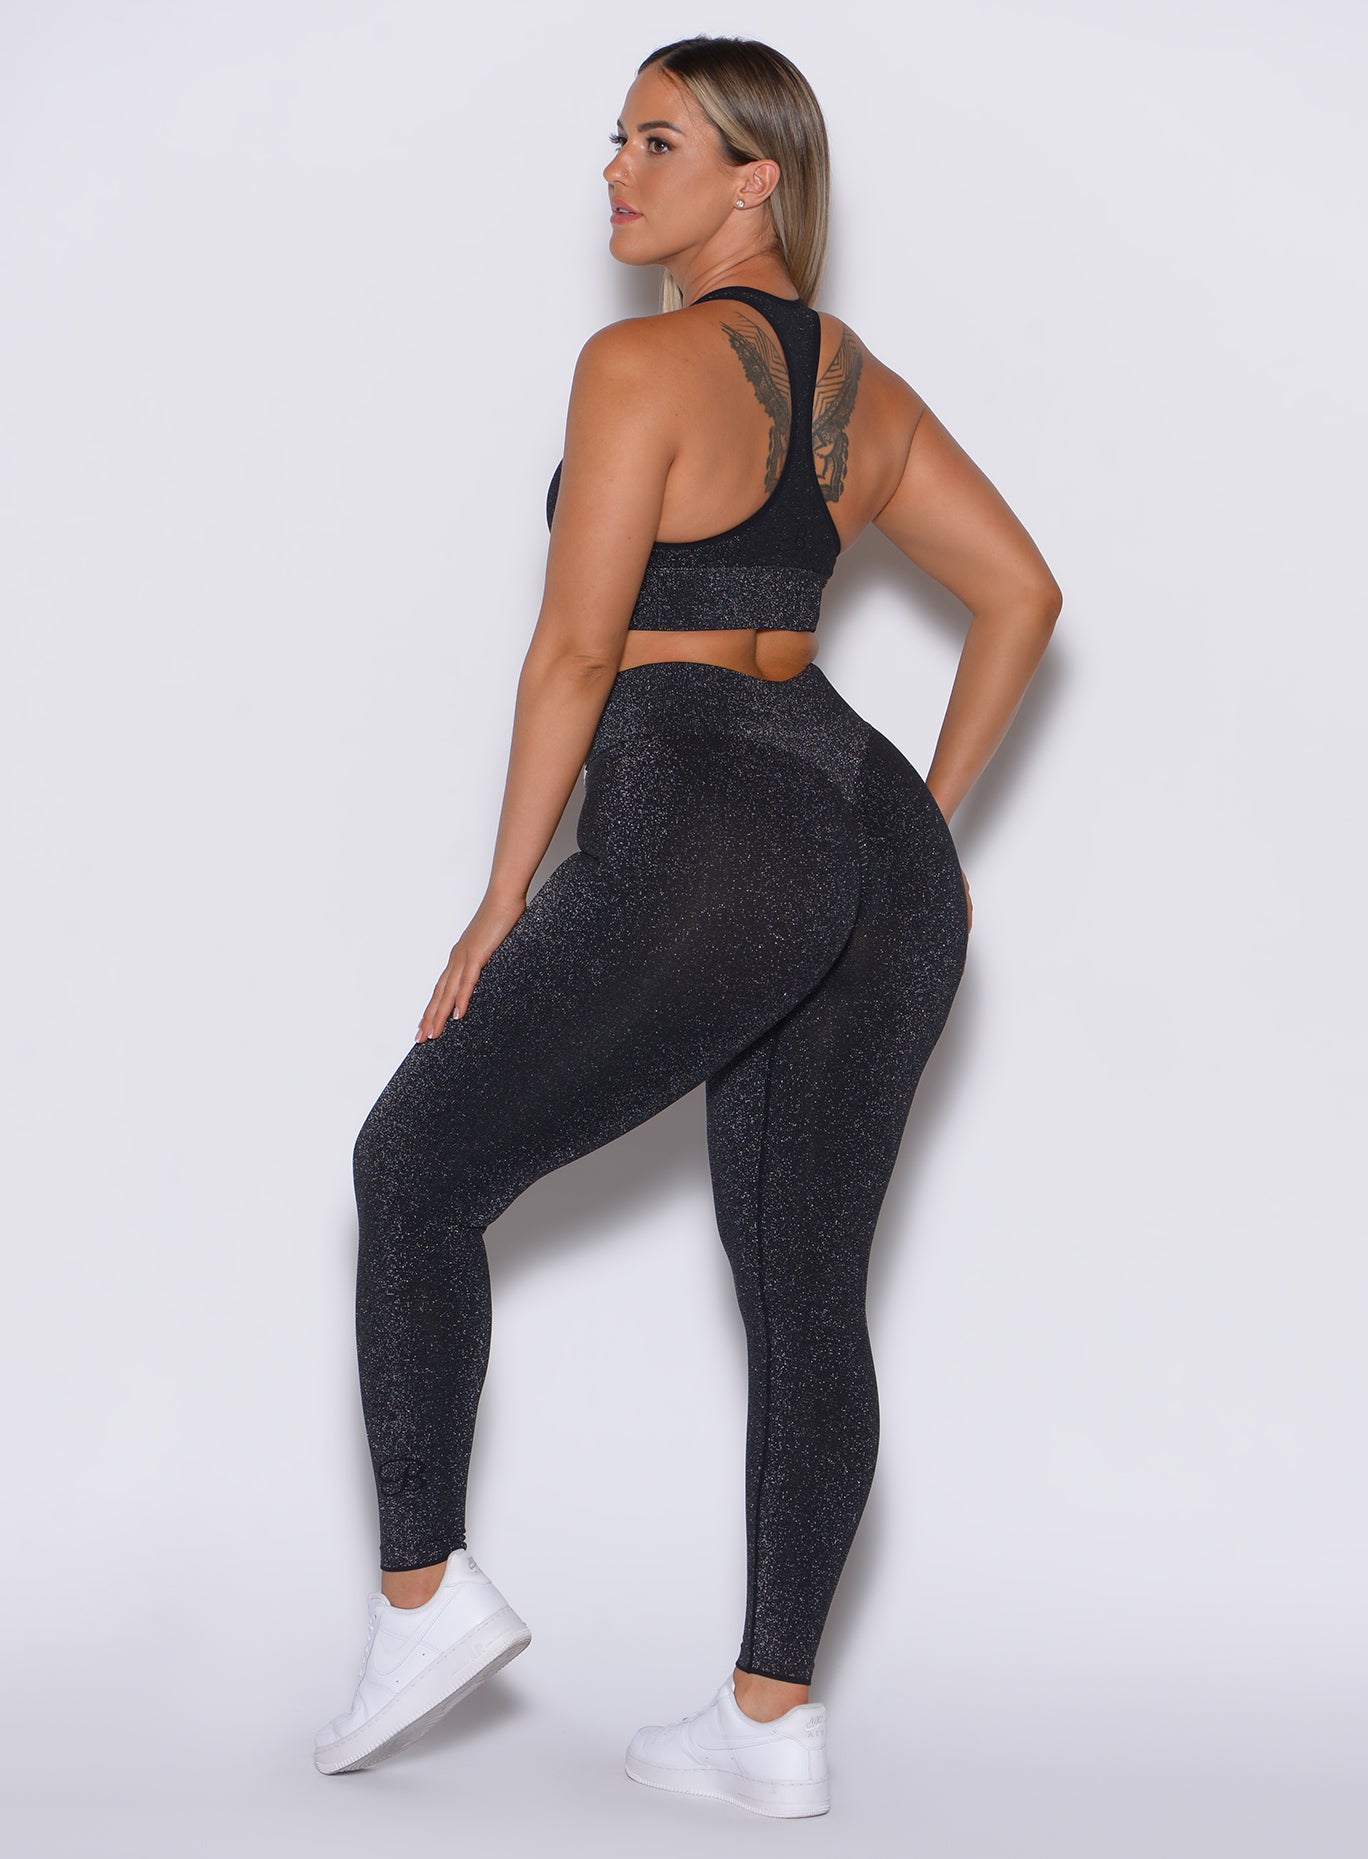 left side profile view of a model facing to her left wearing our Shimmer Seamless Leggings in black sparkle color along with the matching bra